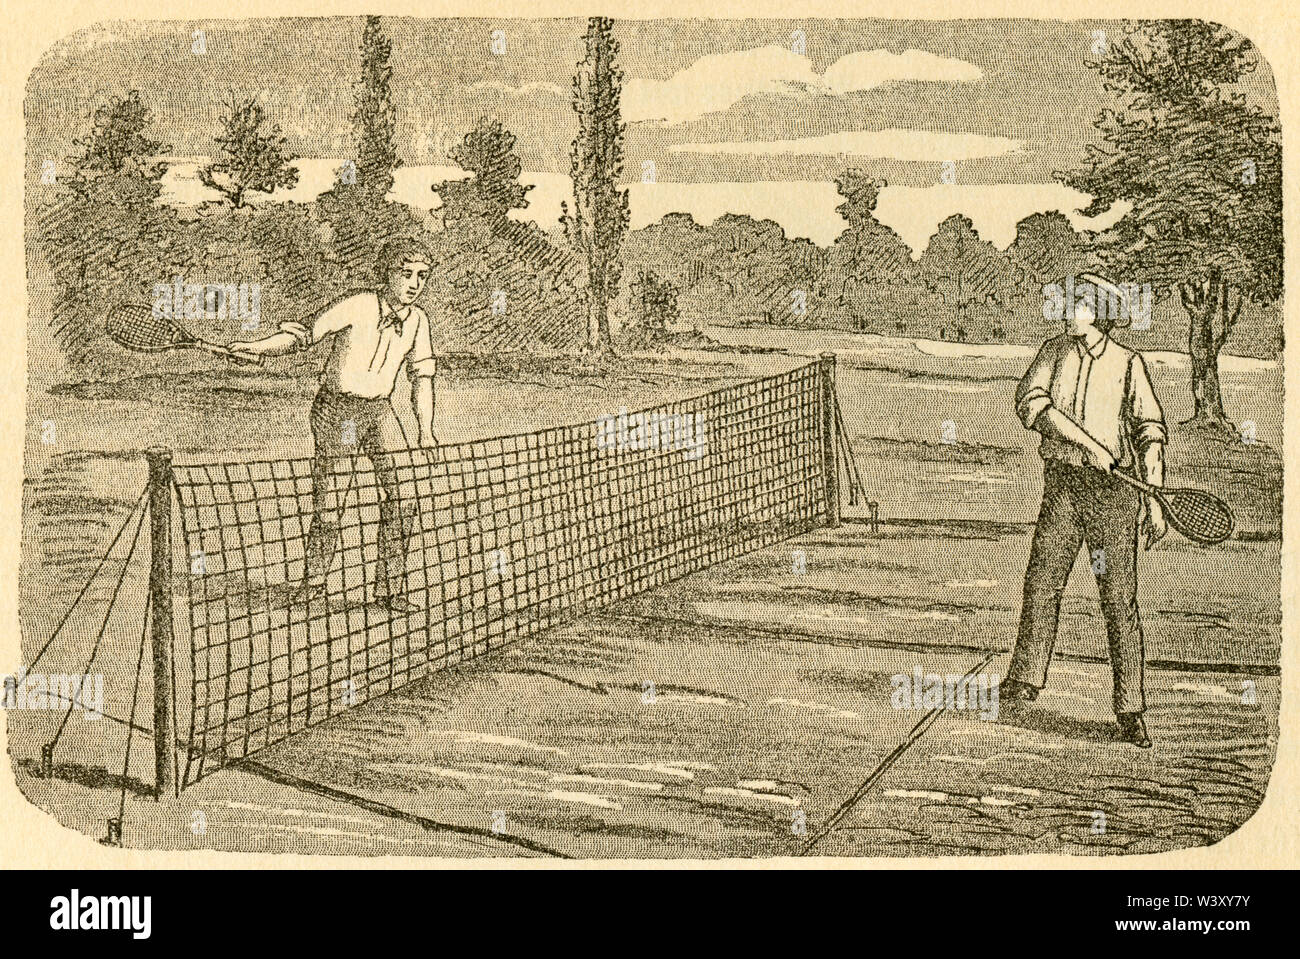 Geschichte Des Tennis High Resolution Stock Photography and Images - Alamy